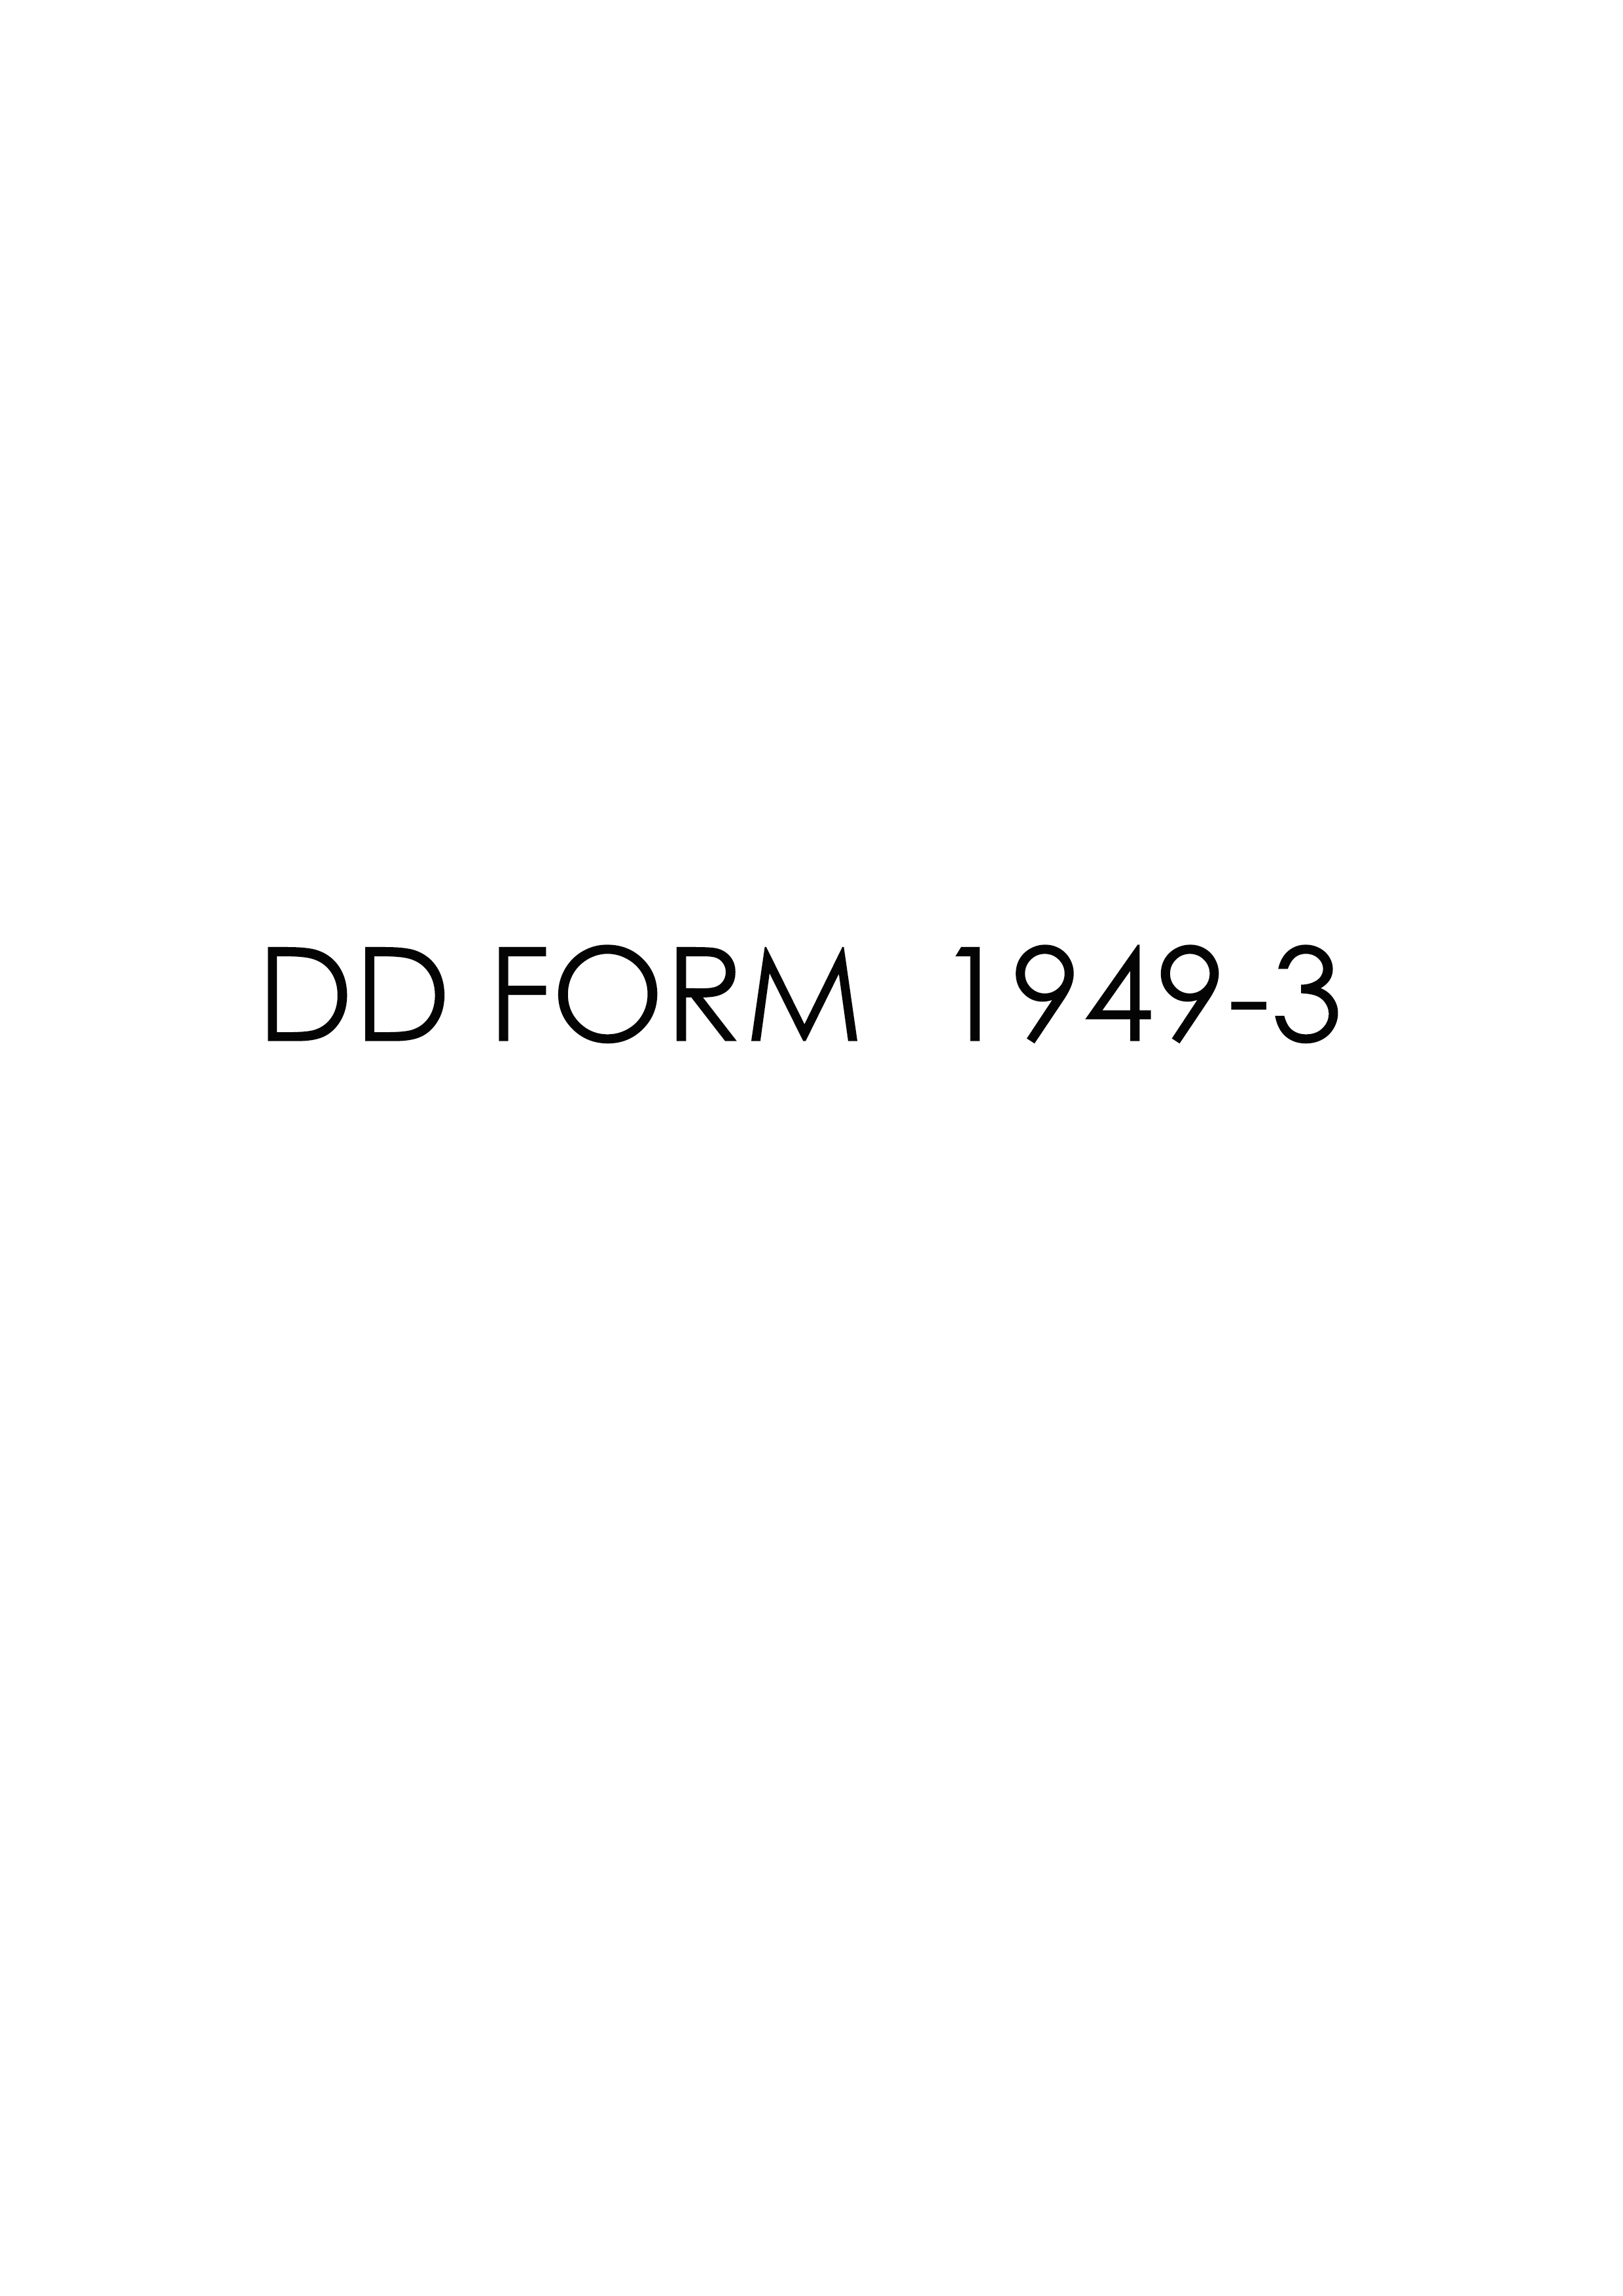 Download Fillable dd Form 1949-3